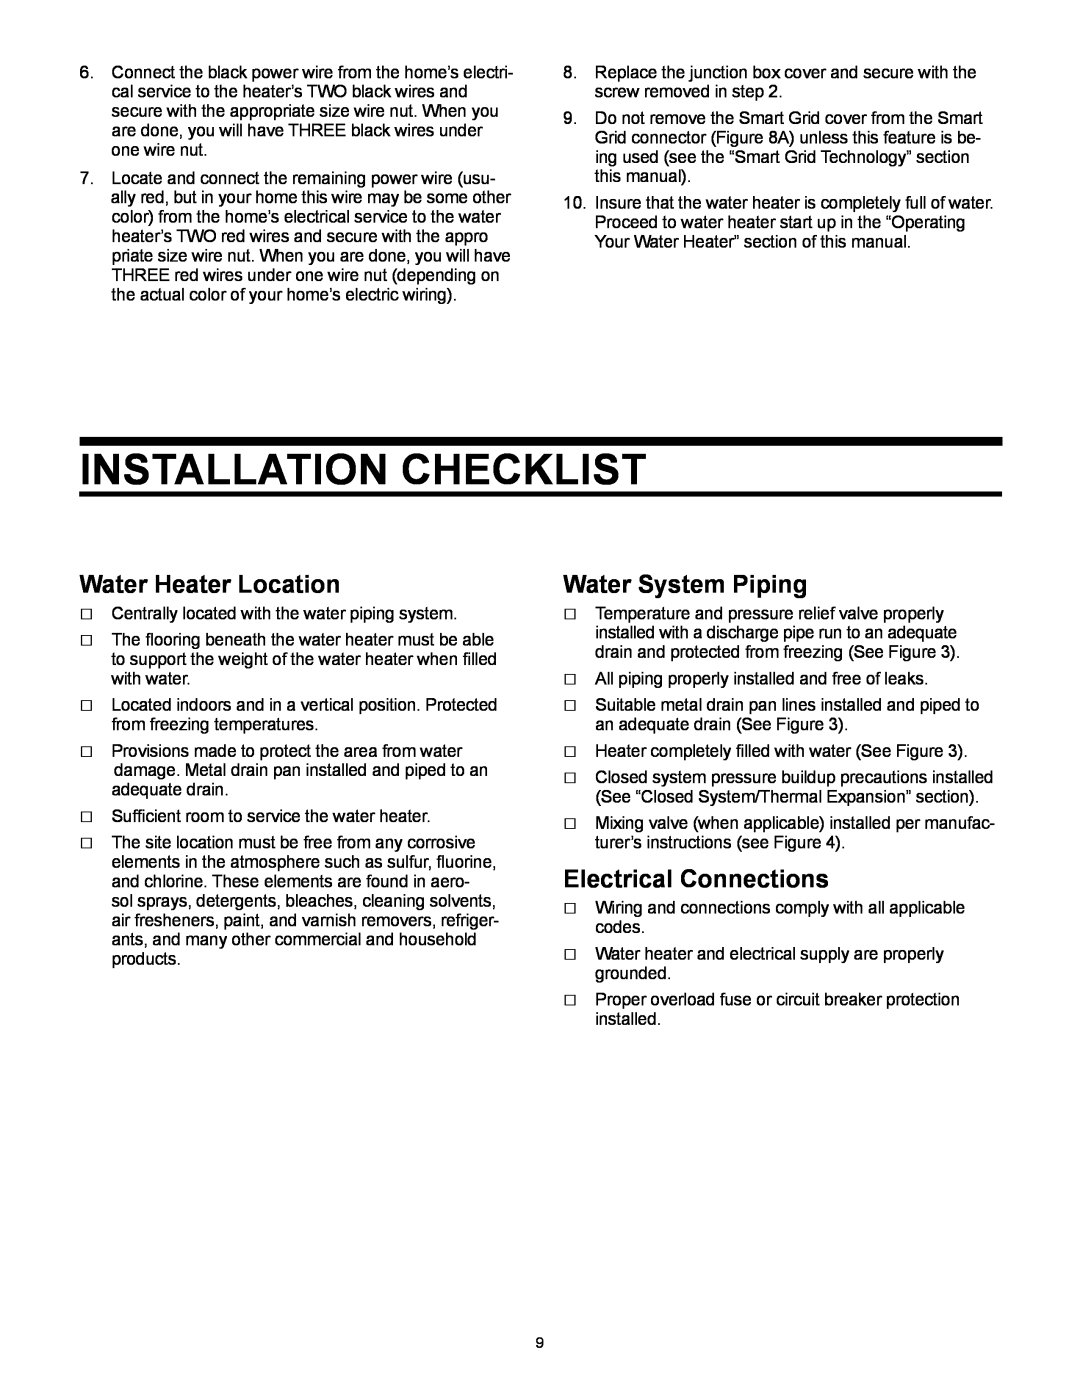 Whirlpool 318686-000 Installation Checklist, Water Heater Location, Water System Piping, Electrical Connections 